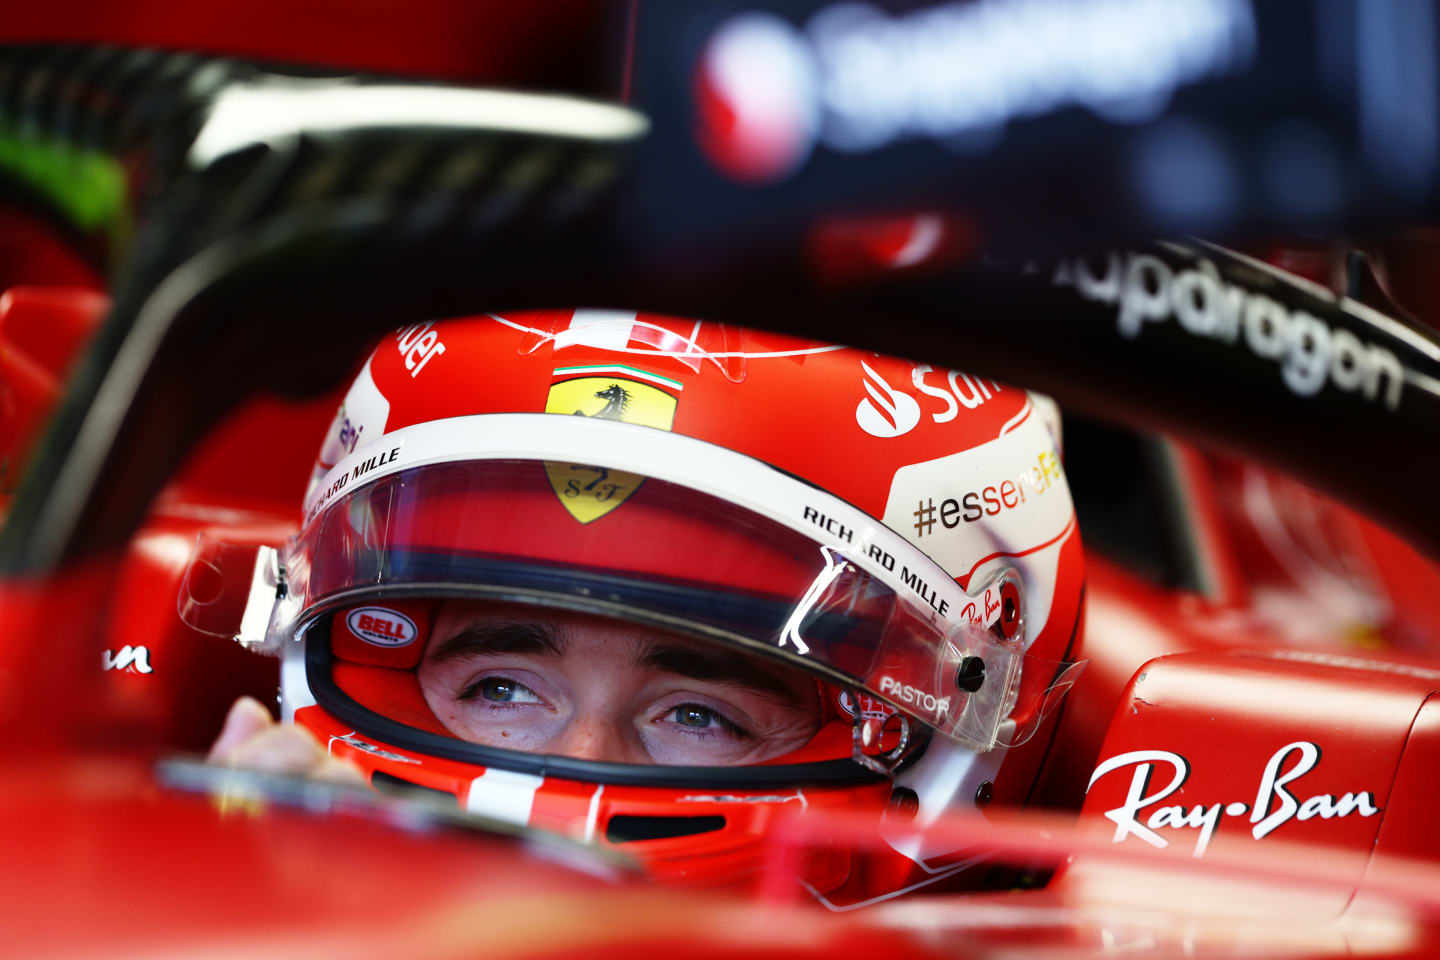 MONTREAL, QUEBEC - JUNE 18: Charles Leclerc of Monaco and Ferrari prepares to drive in the garage